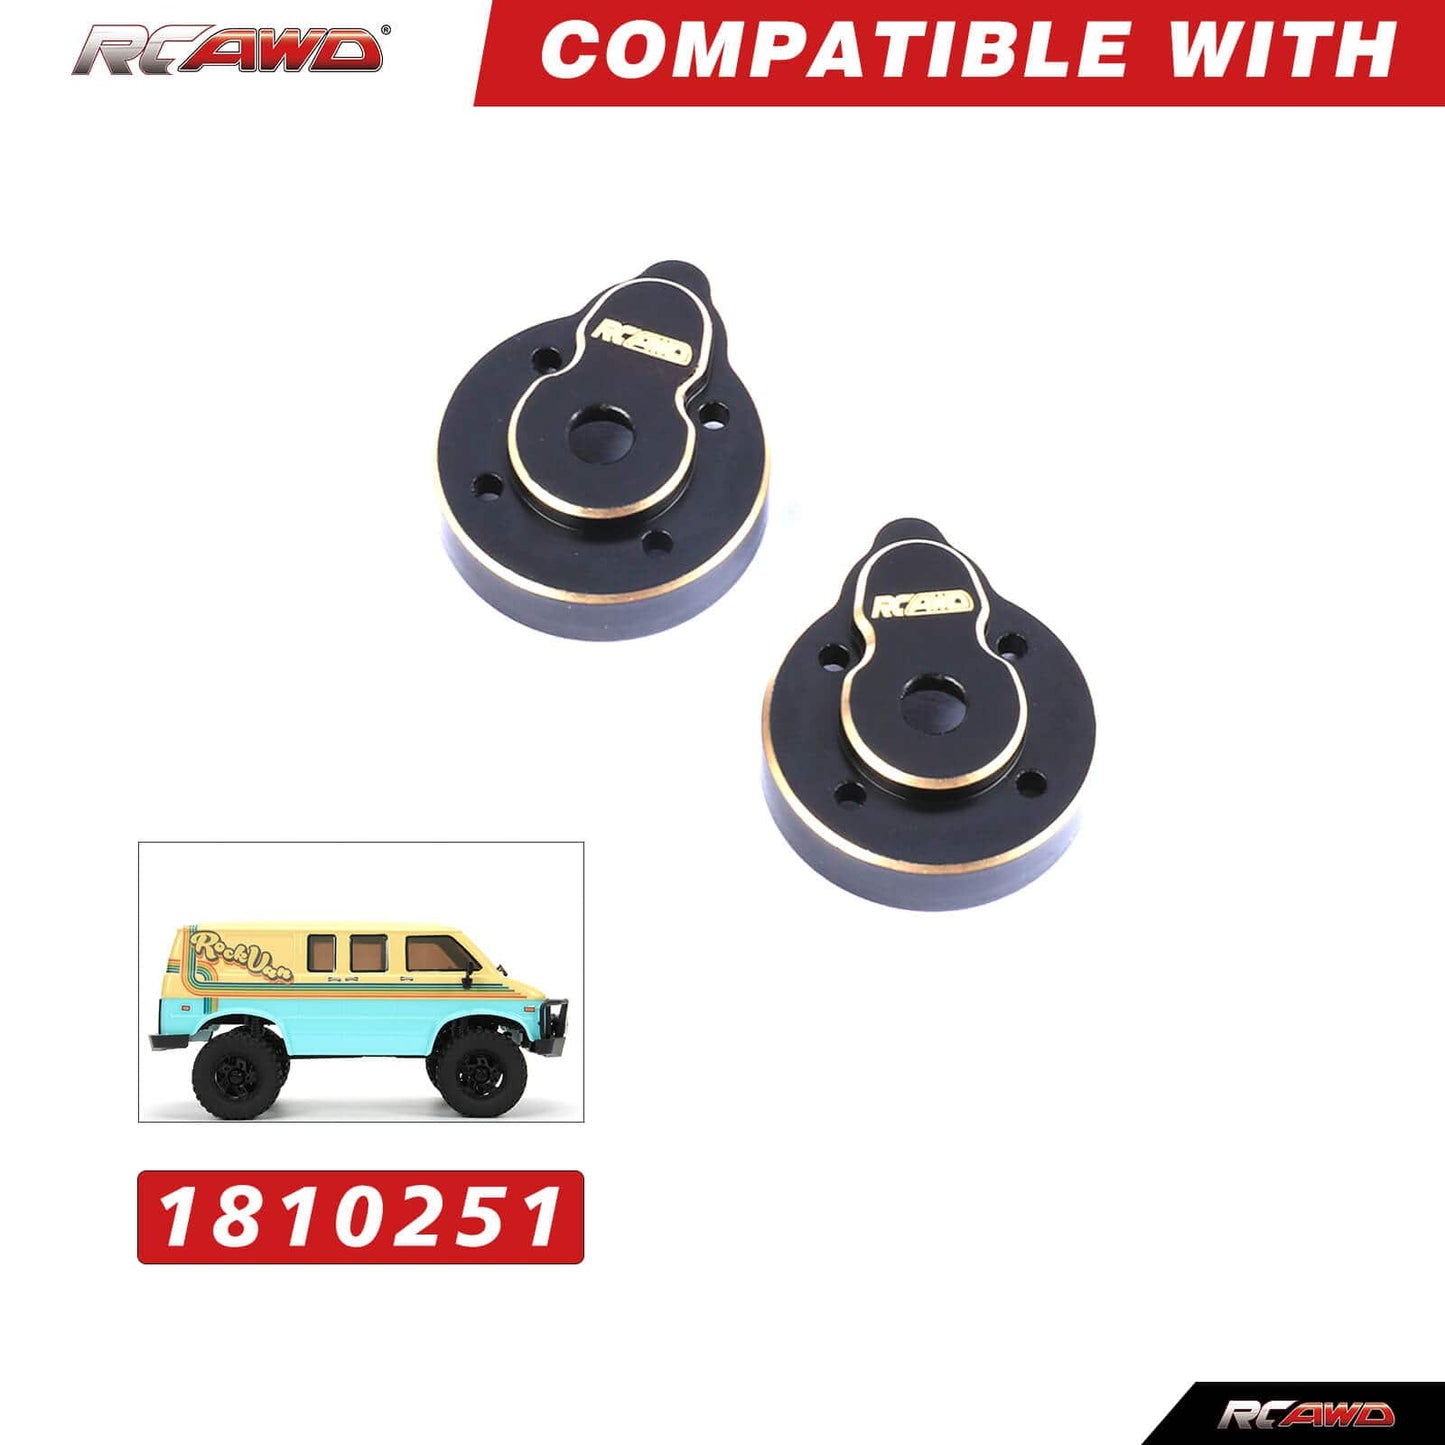 RCAWD HobbyPlus CR18 RCAWD HobbyPlus CR18 Upgrades Front &Rear Portal Axle Counterweight 240297BL+240296BL